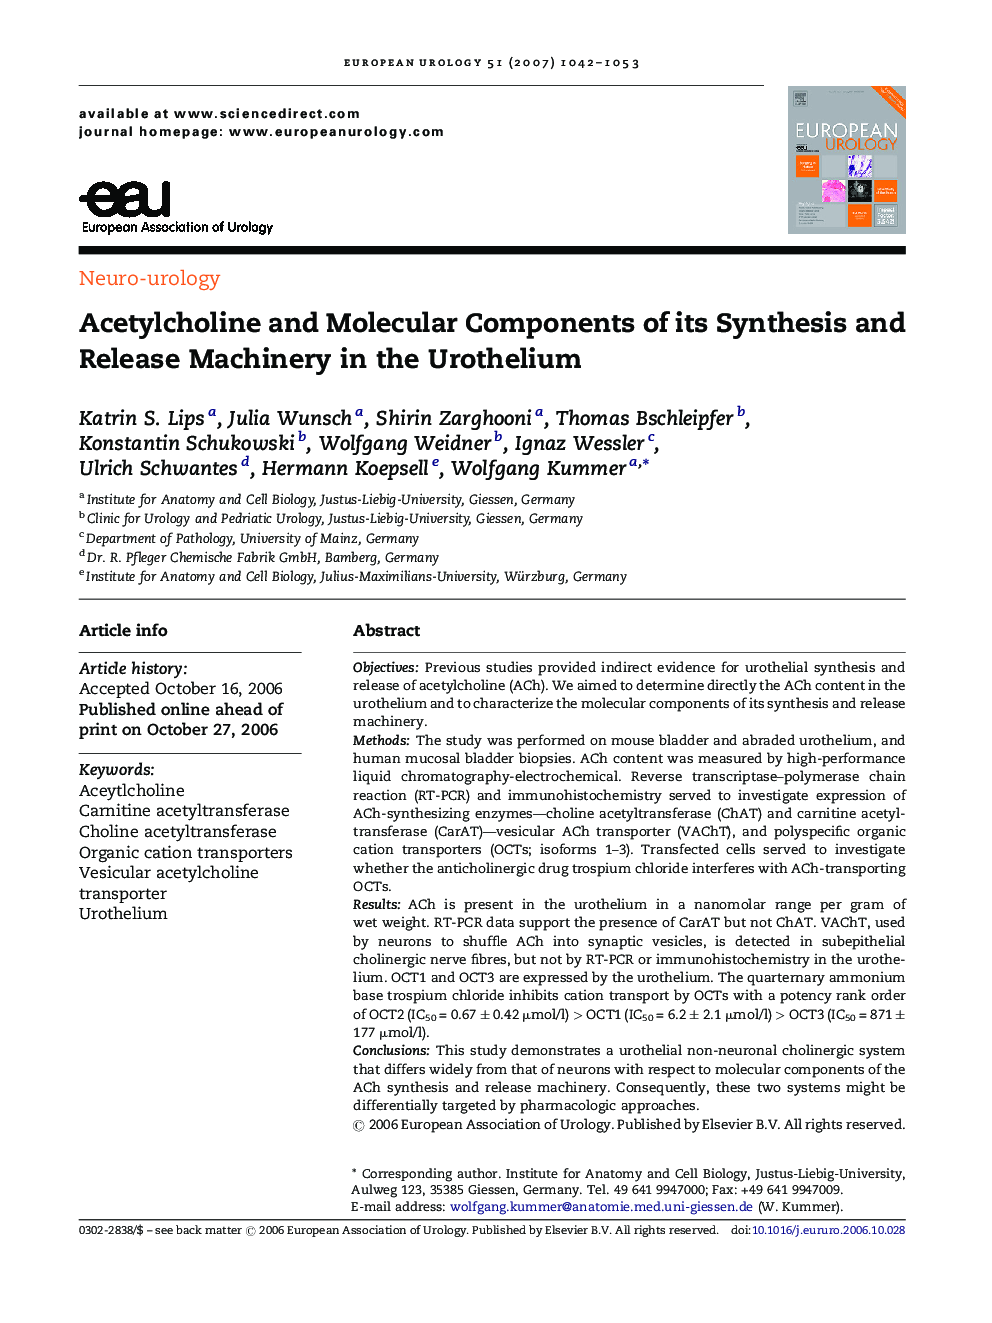 Acetylcholine and Molecular Components of its Synthesis and Release Machinery in the Urothelium